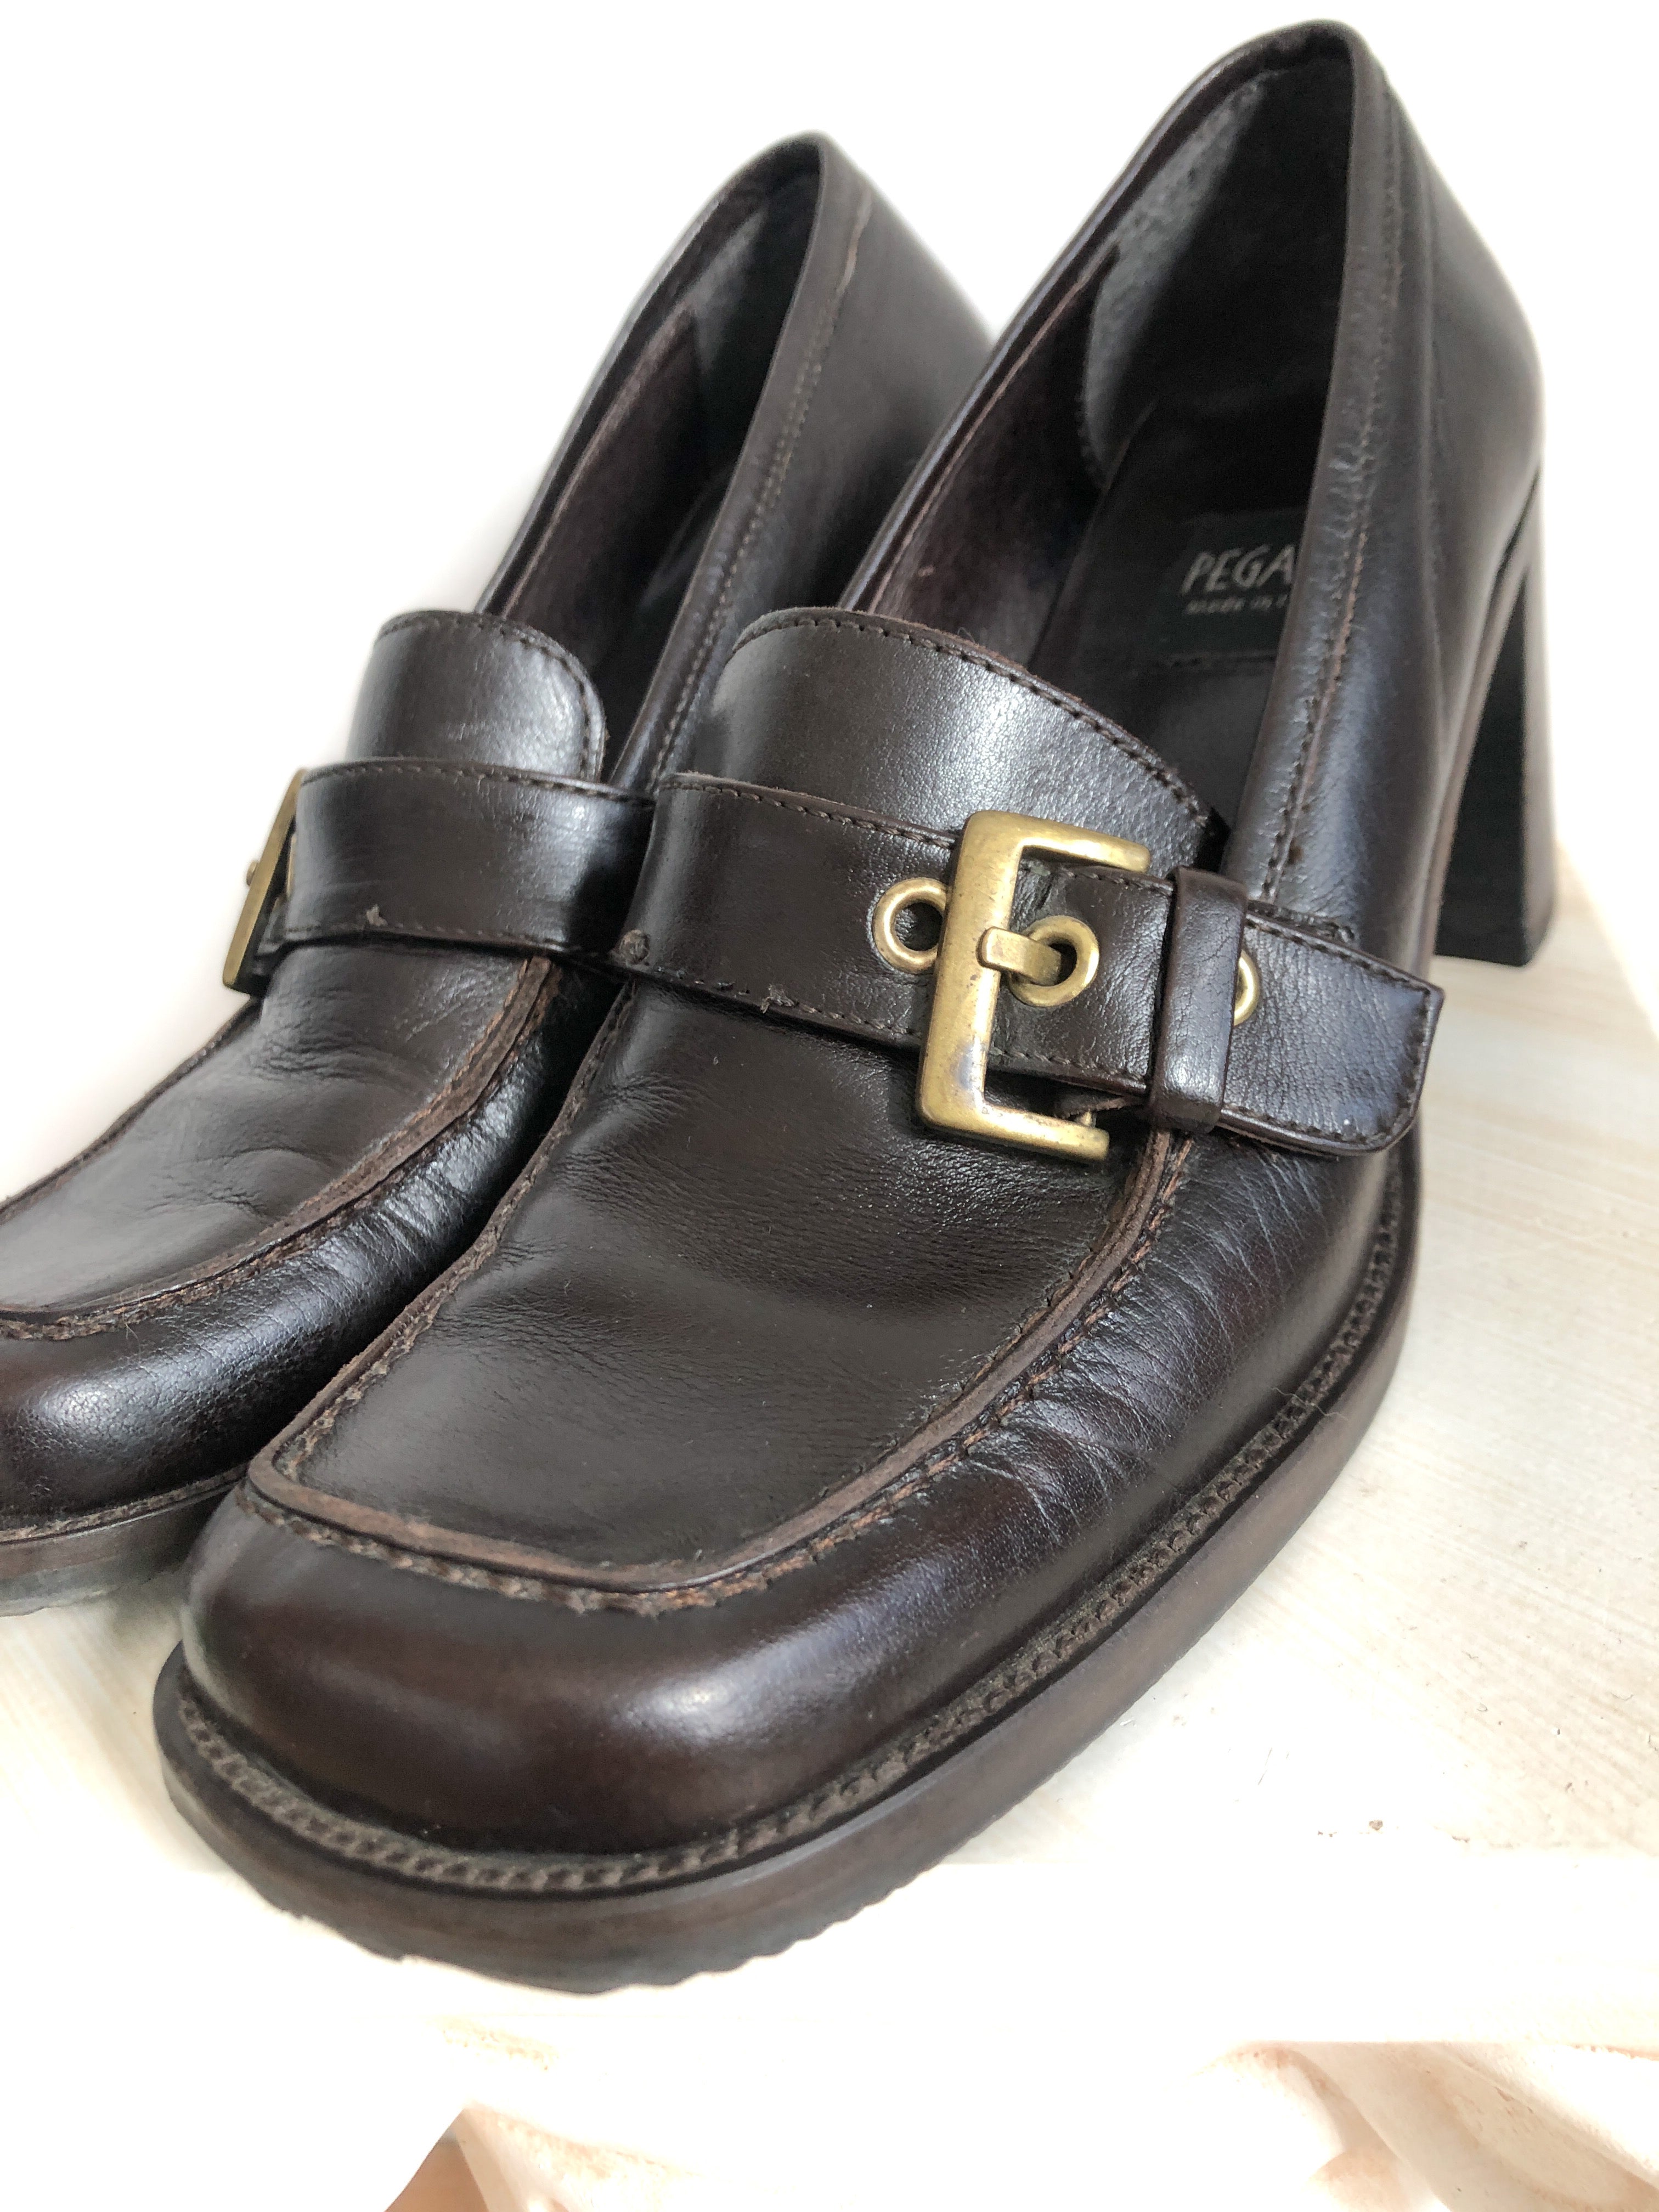 Size 37 Chunky Heel, Brown Leather Loafer Shoes, Large Buckle Detail, 1990s Vintage, Made in Italy